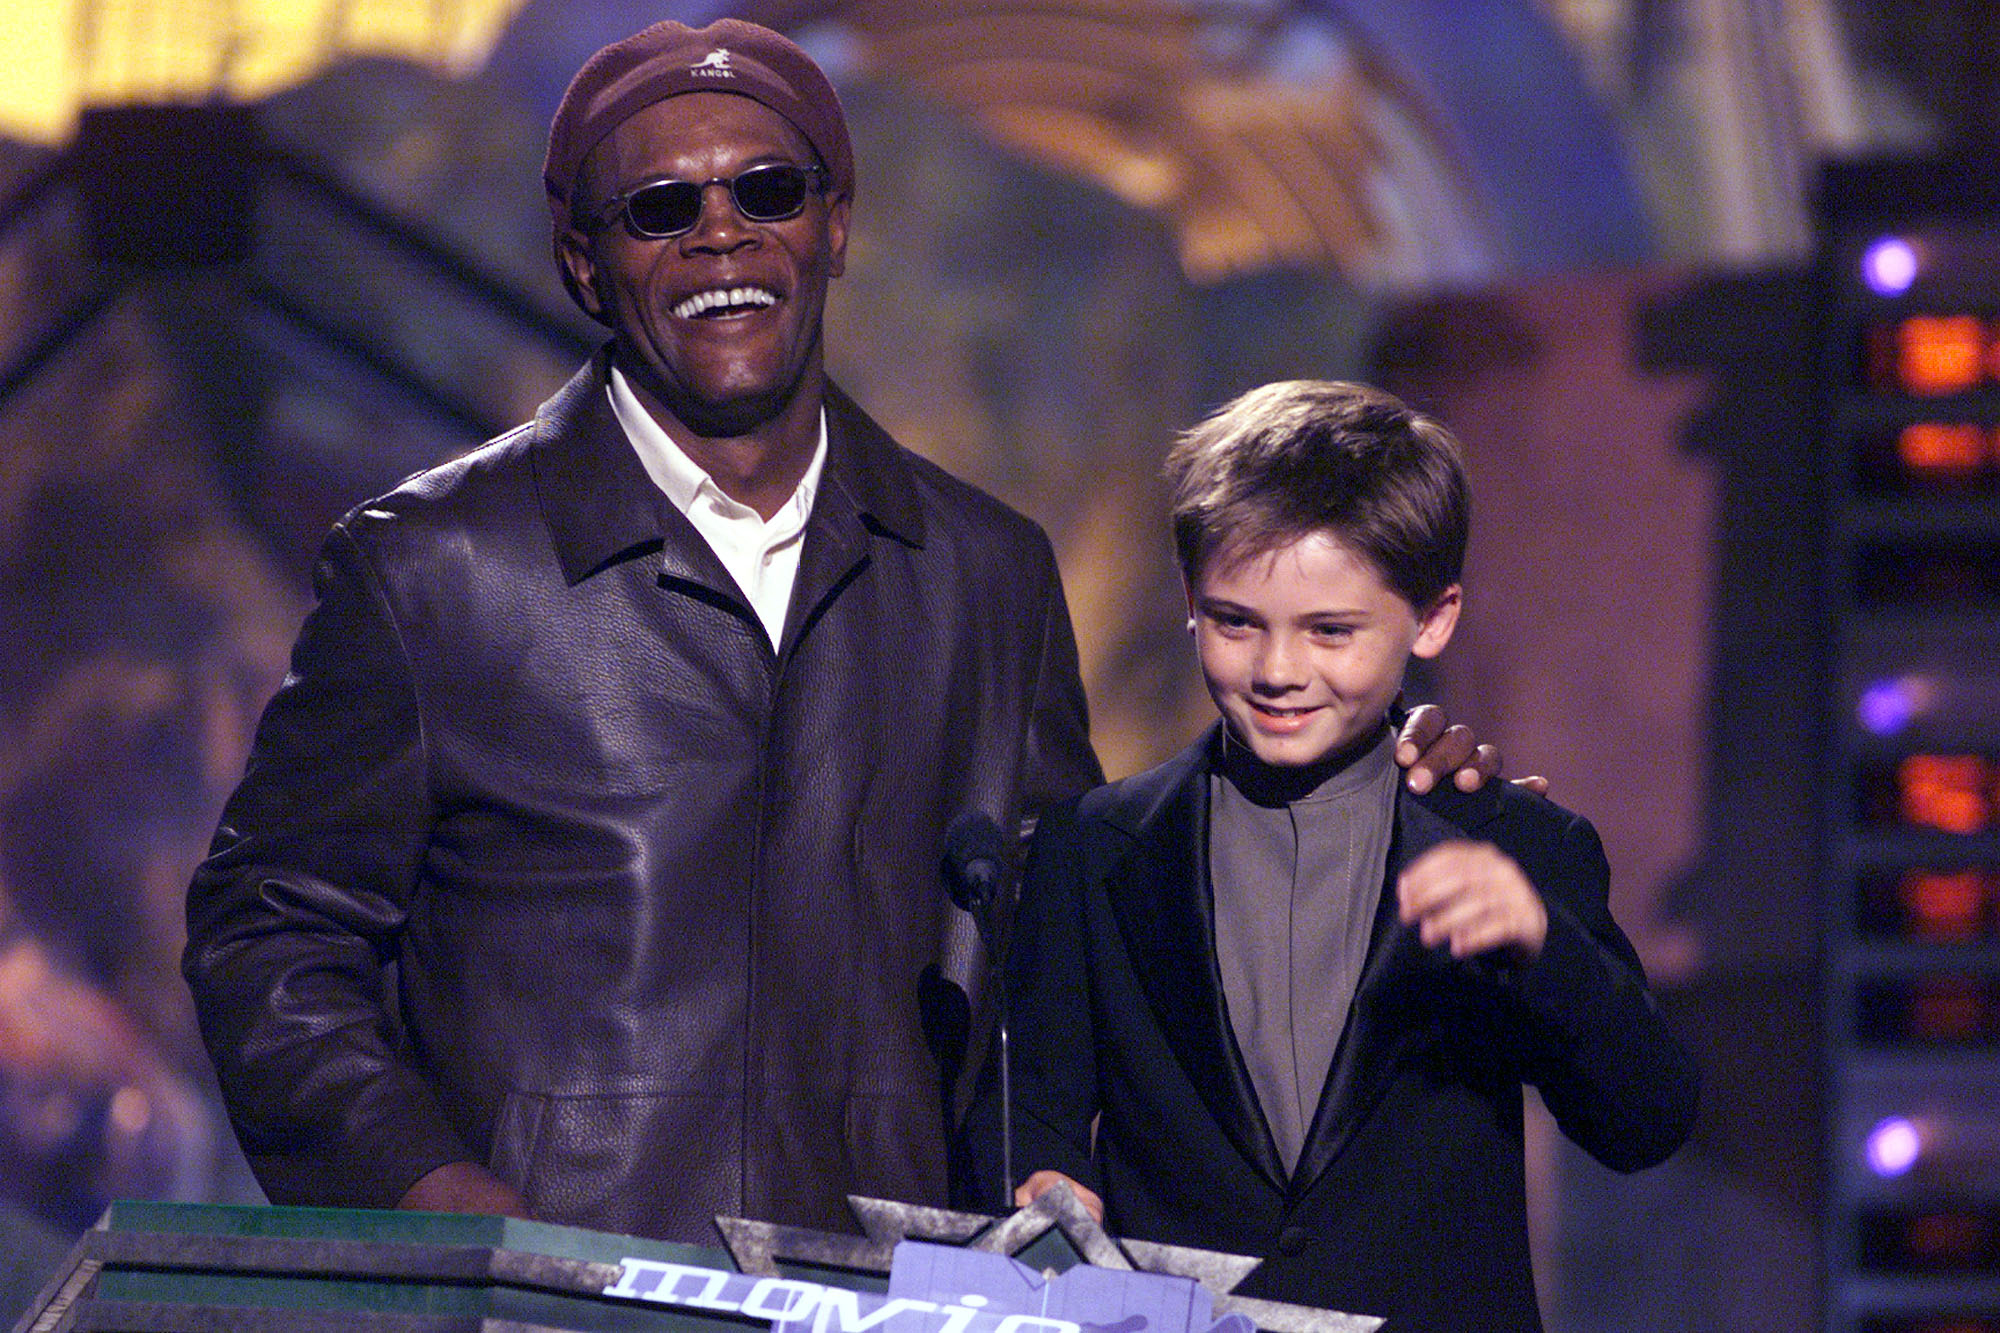 Presenters Samuel L. Jackson, and Jake Lloyd in Los Angeles, California, on June 5, 1999 | Source: Getty Images